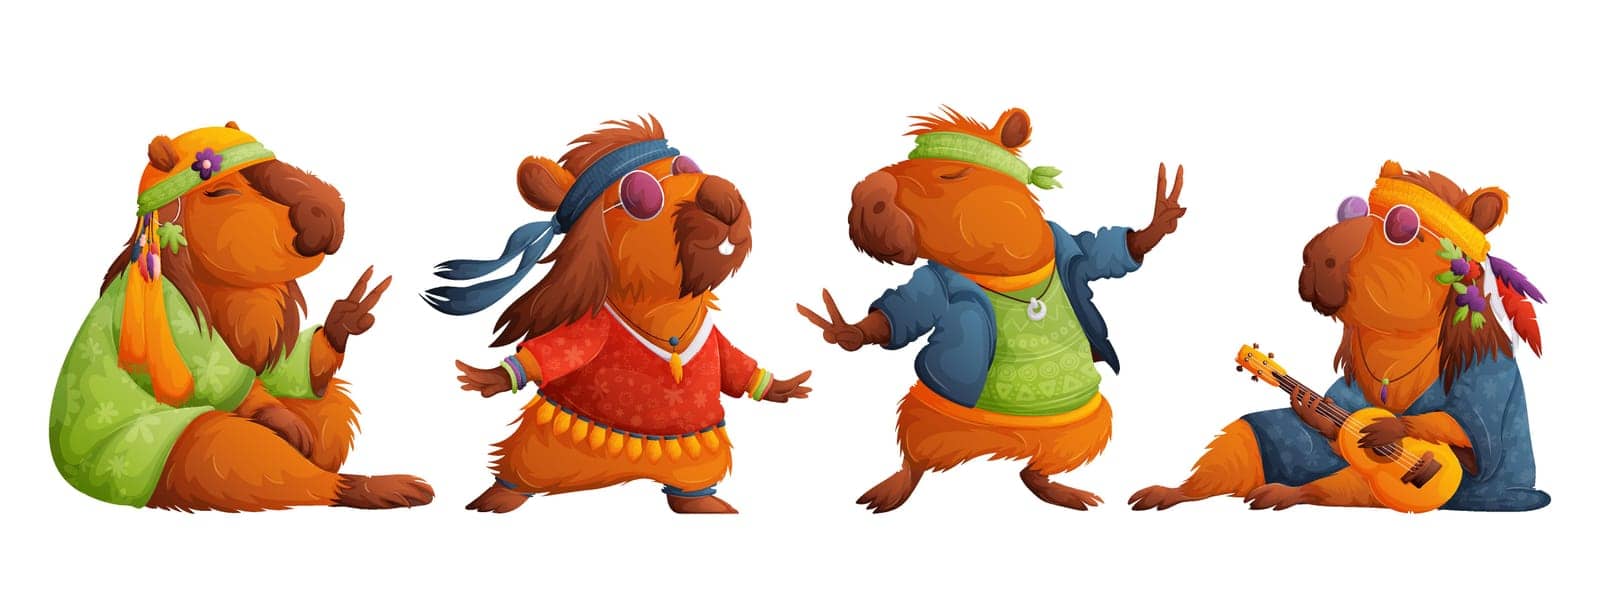 Set of peaceful hippie capybaras. Calm capybara in bright hippie clothes and pink glasses, relaxes, meditates and plays a small ukulele guitar. Cartoon style